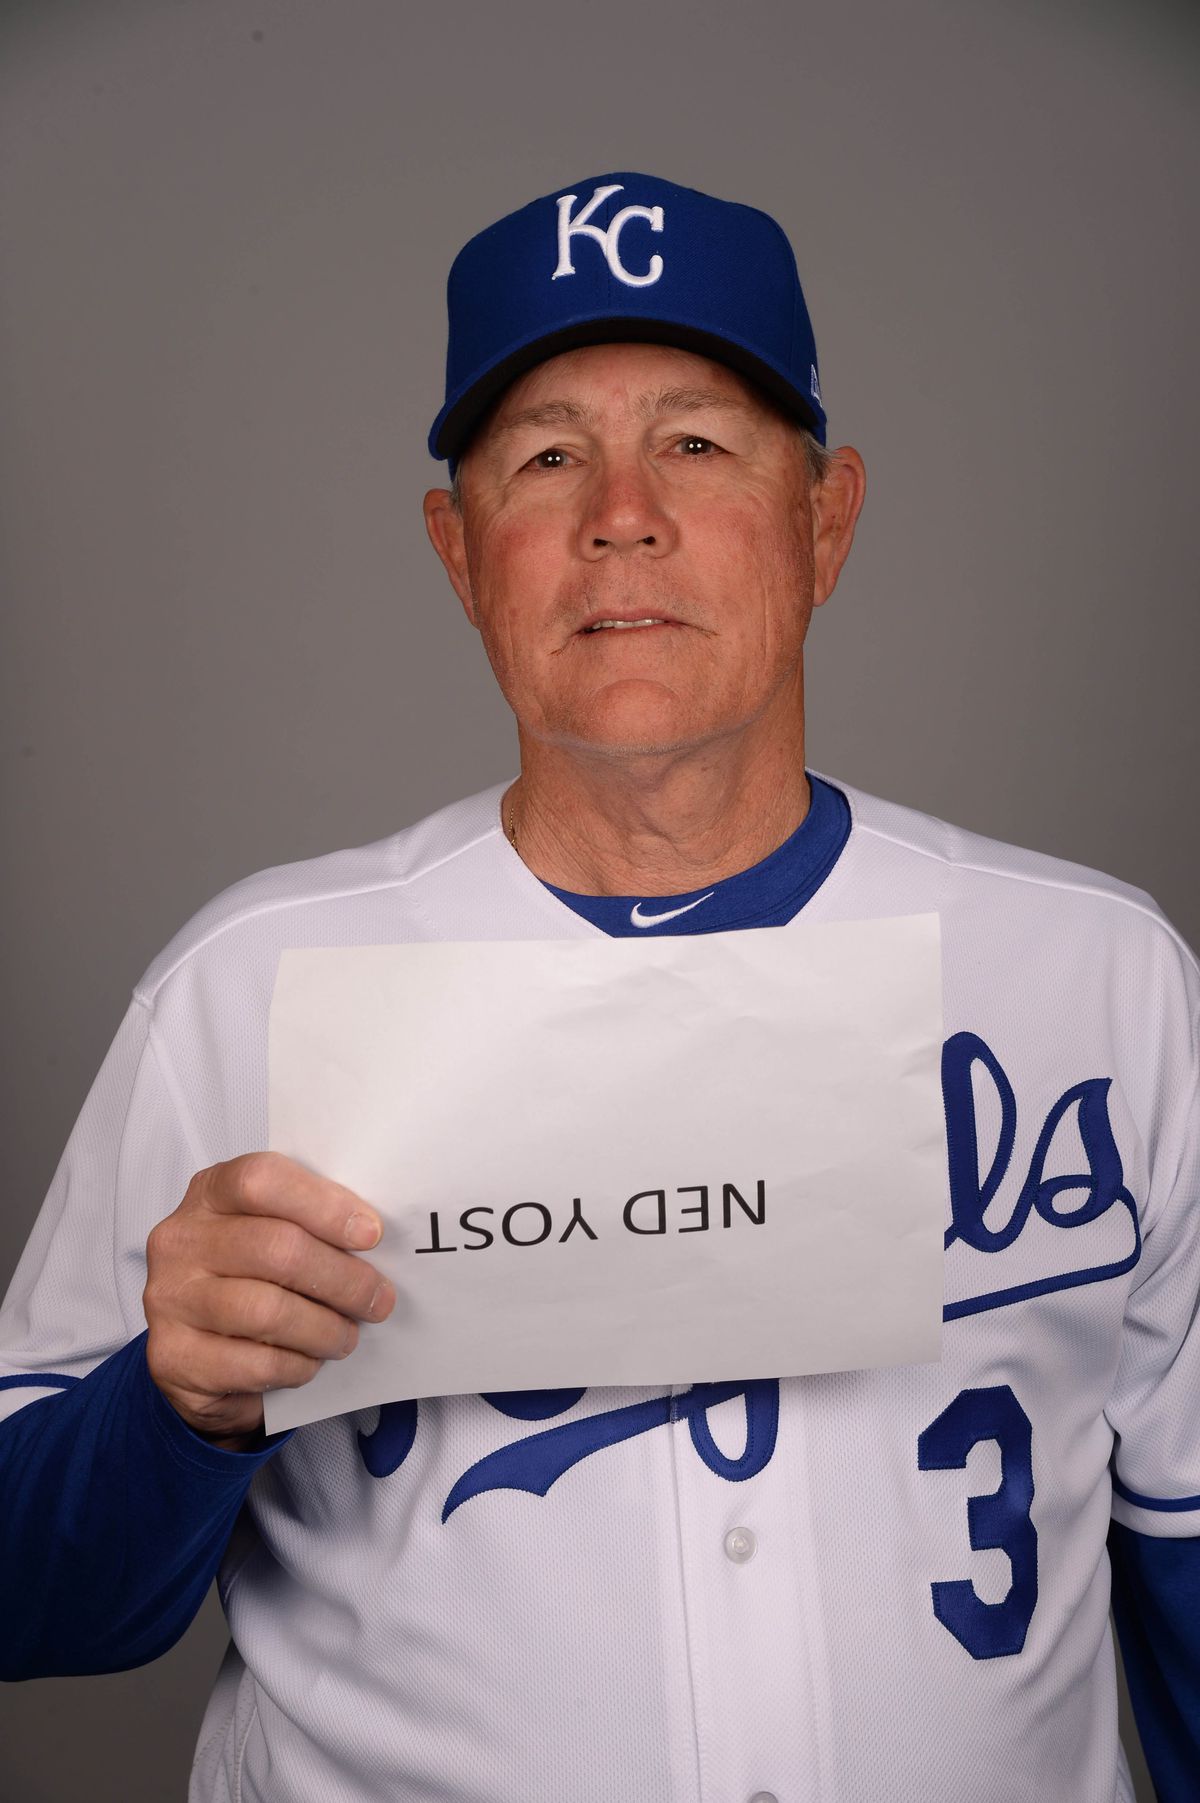 Kansas City Royals manager Ned Yost (3) poses for a photo during media day at Surprise Stadium. Mandatory Credit: Joe Camporeale